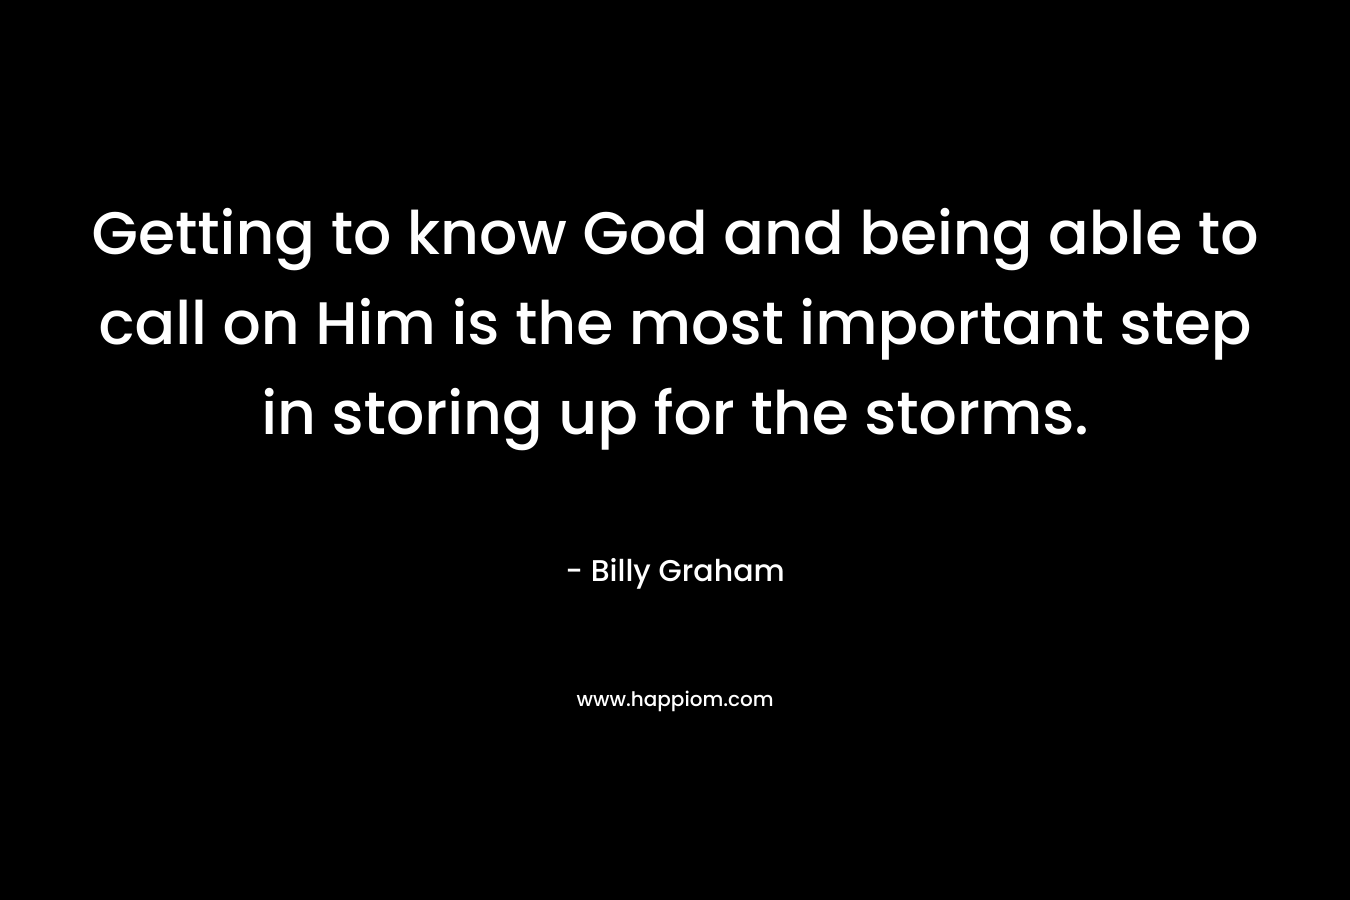 Getting to know God and being able to call on Him is the most important step in storing up for the storms. – Billy Graham